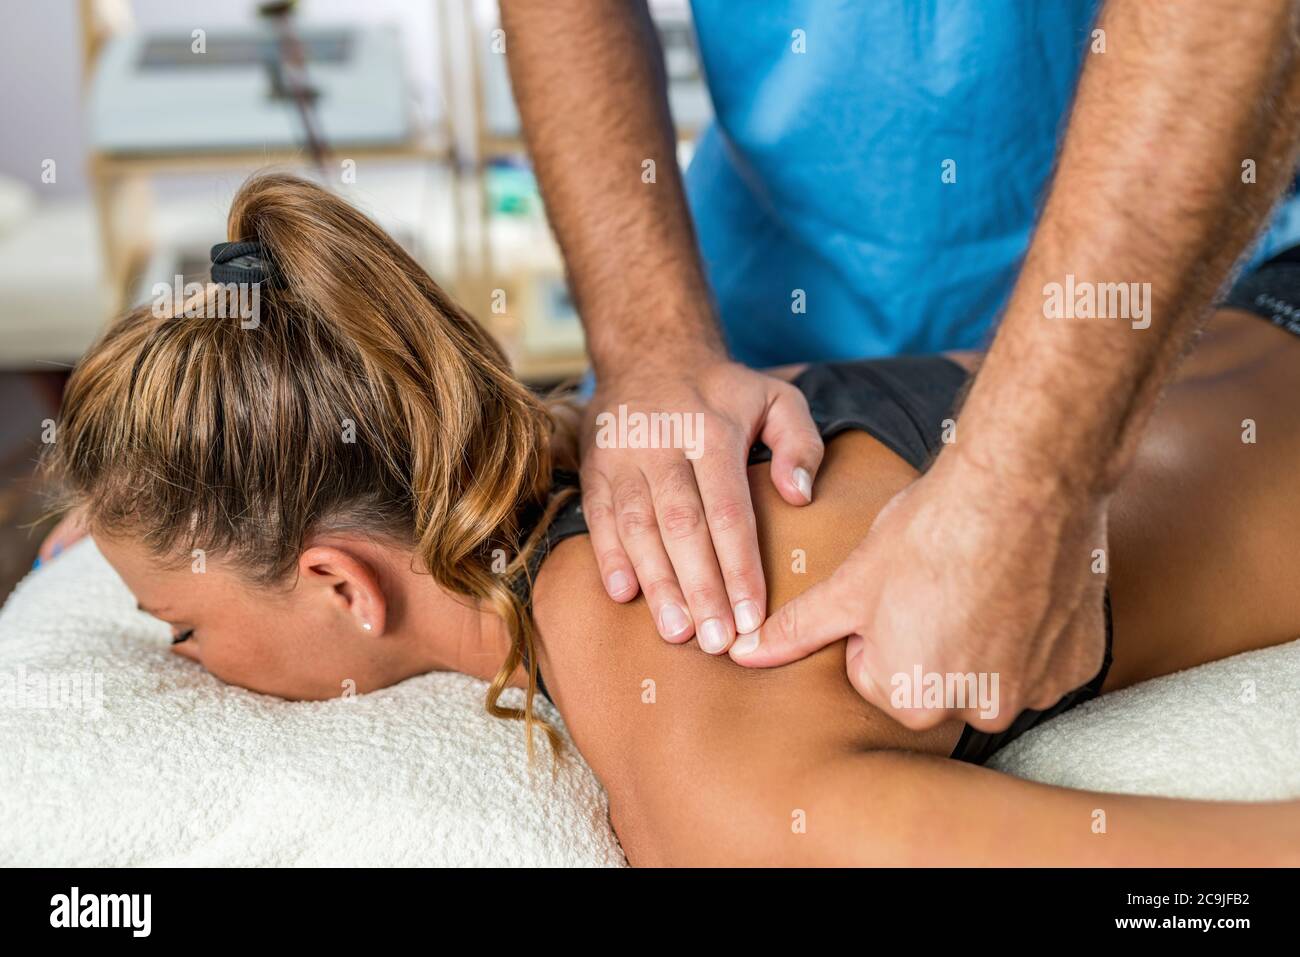 Osteopathy. Therapist applying strong pressure to shoulder muscles. Stock Photo